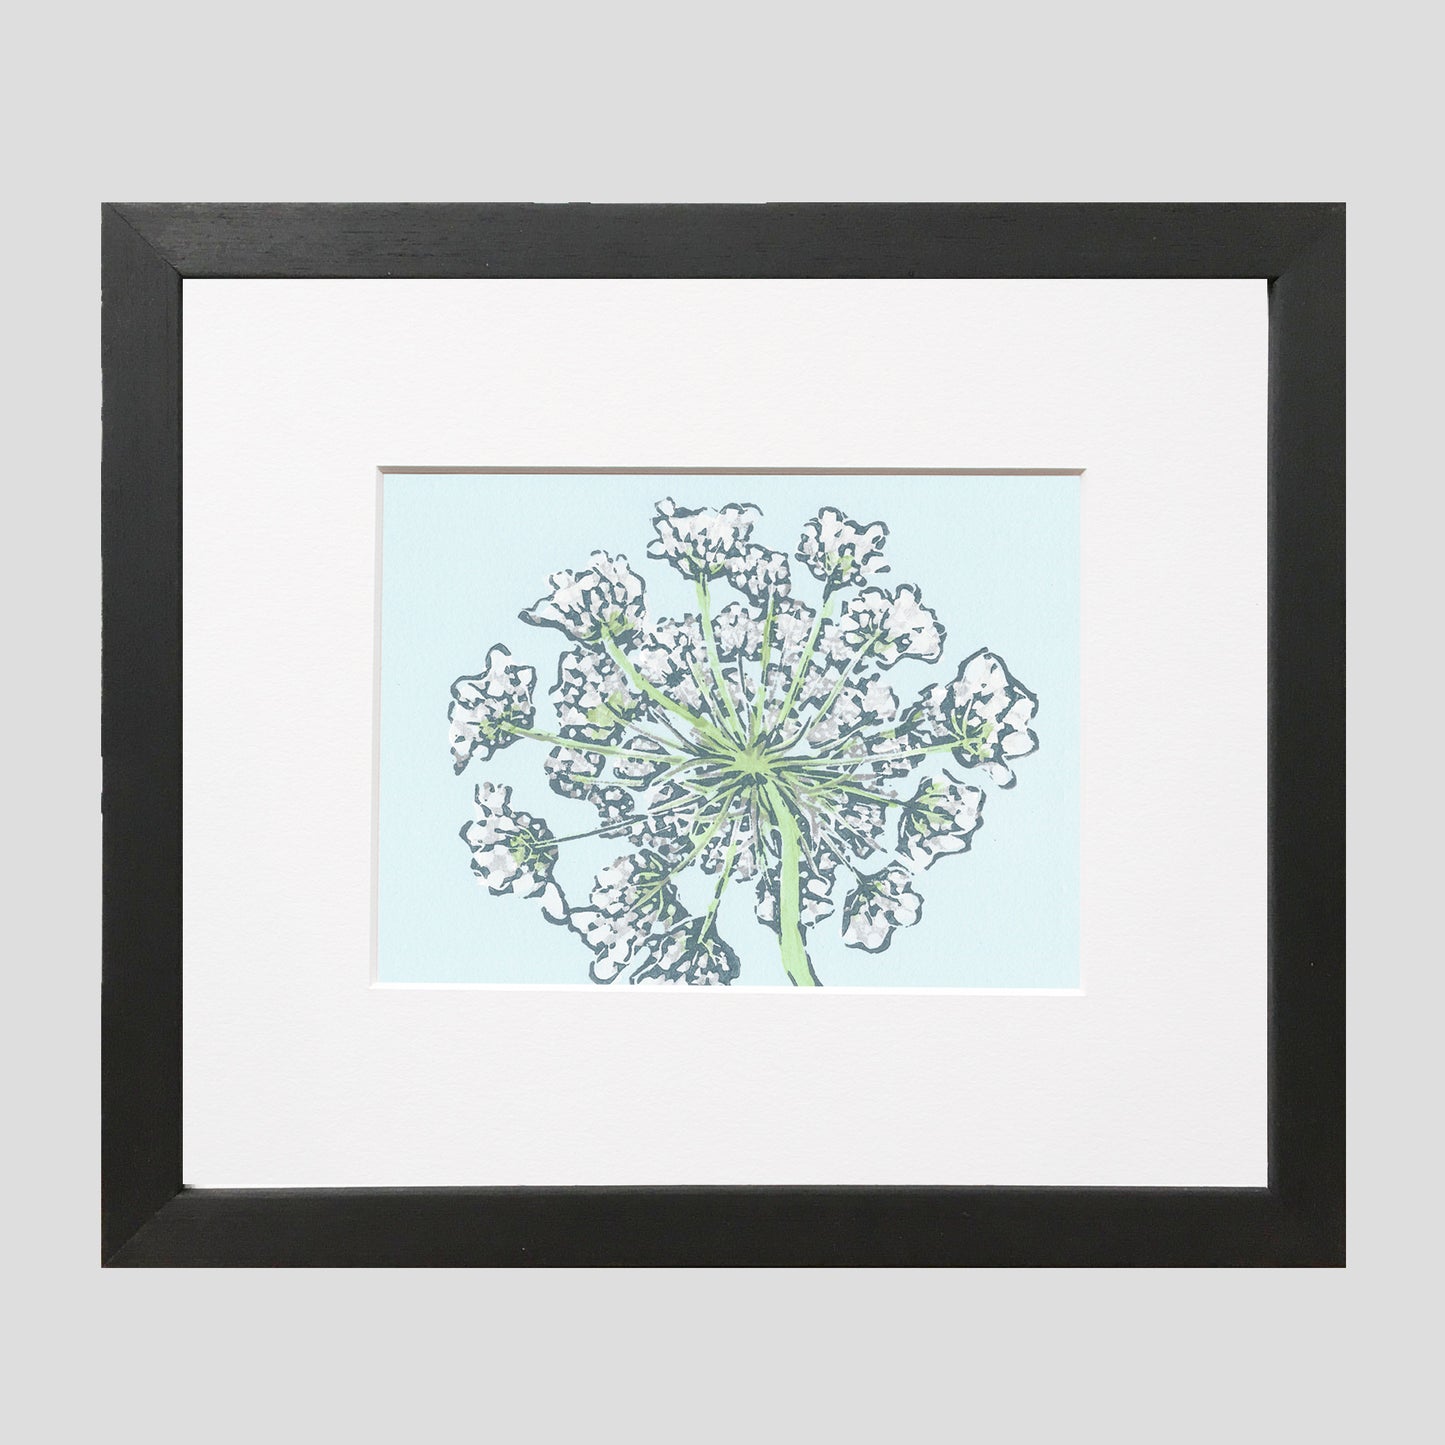 Queen Anne's Lace art by printmaker Natalia Wohletz of Peninsula Prints featuring the wildflower growing on Mackinac Island.